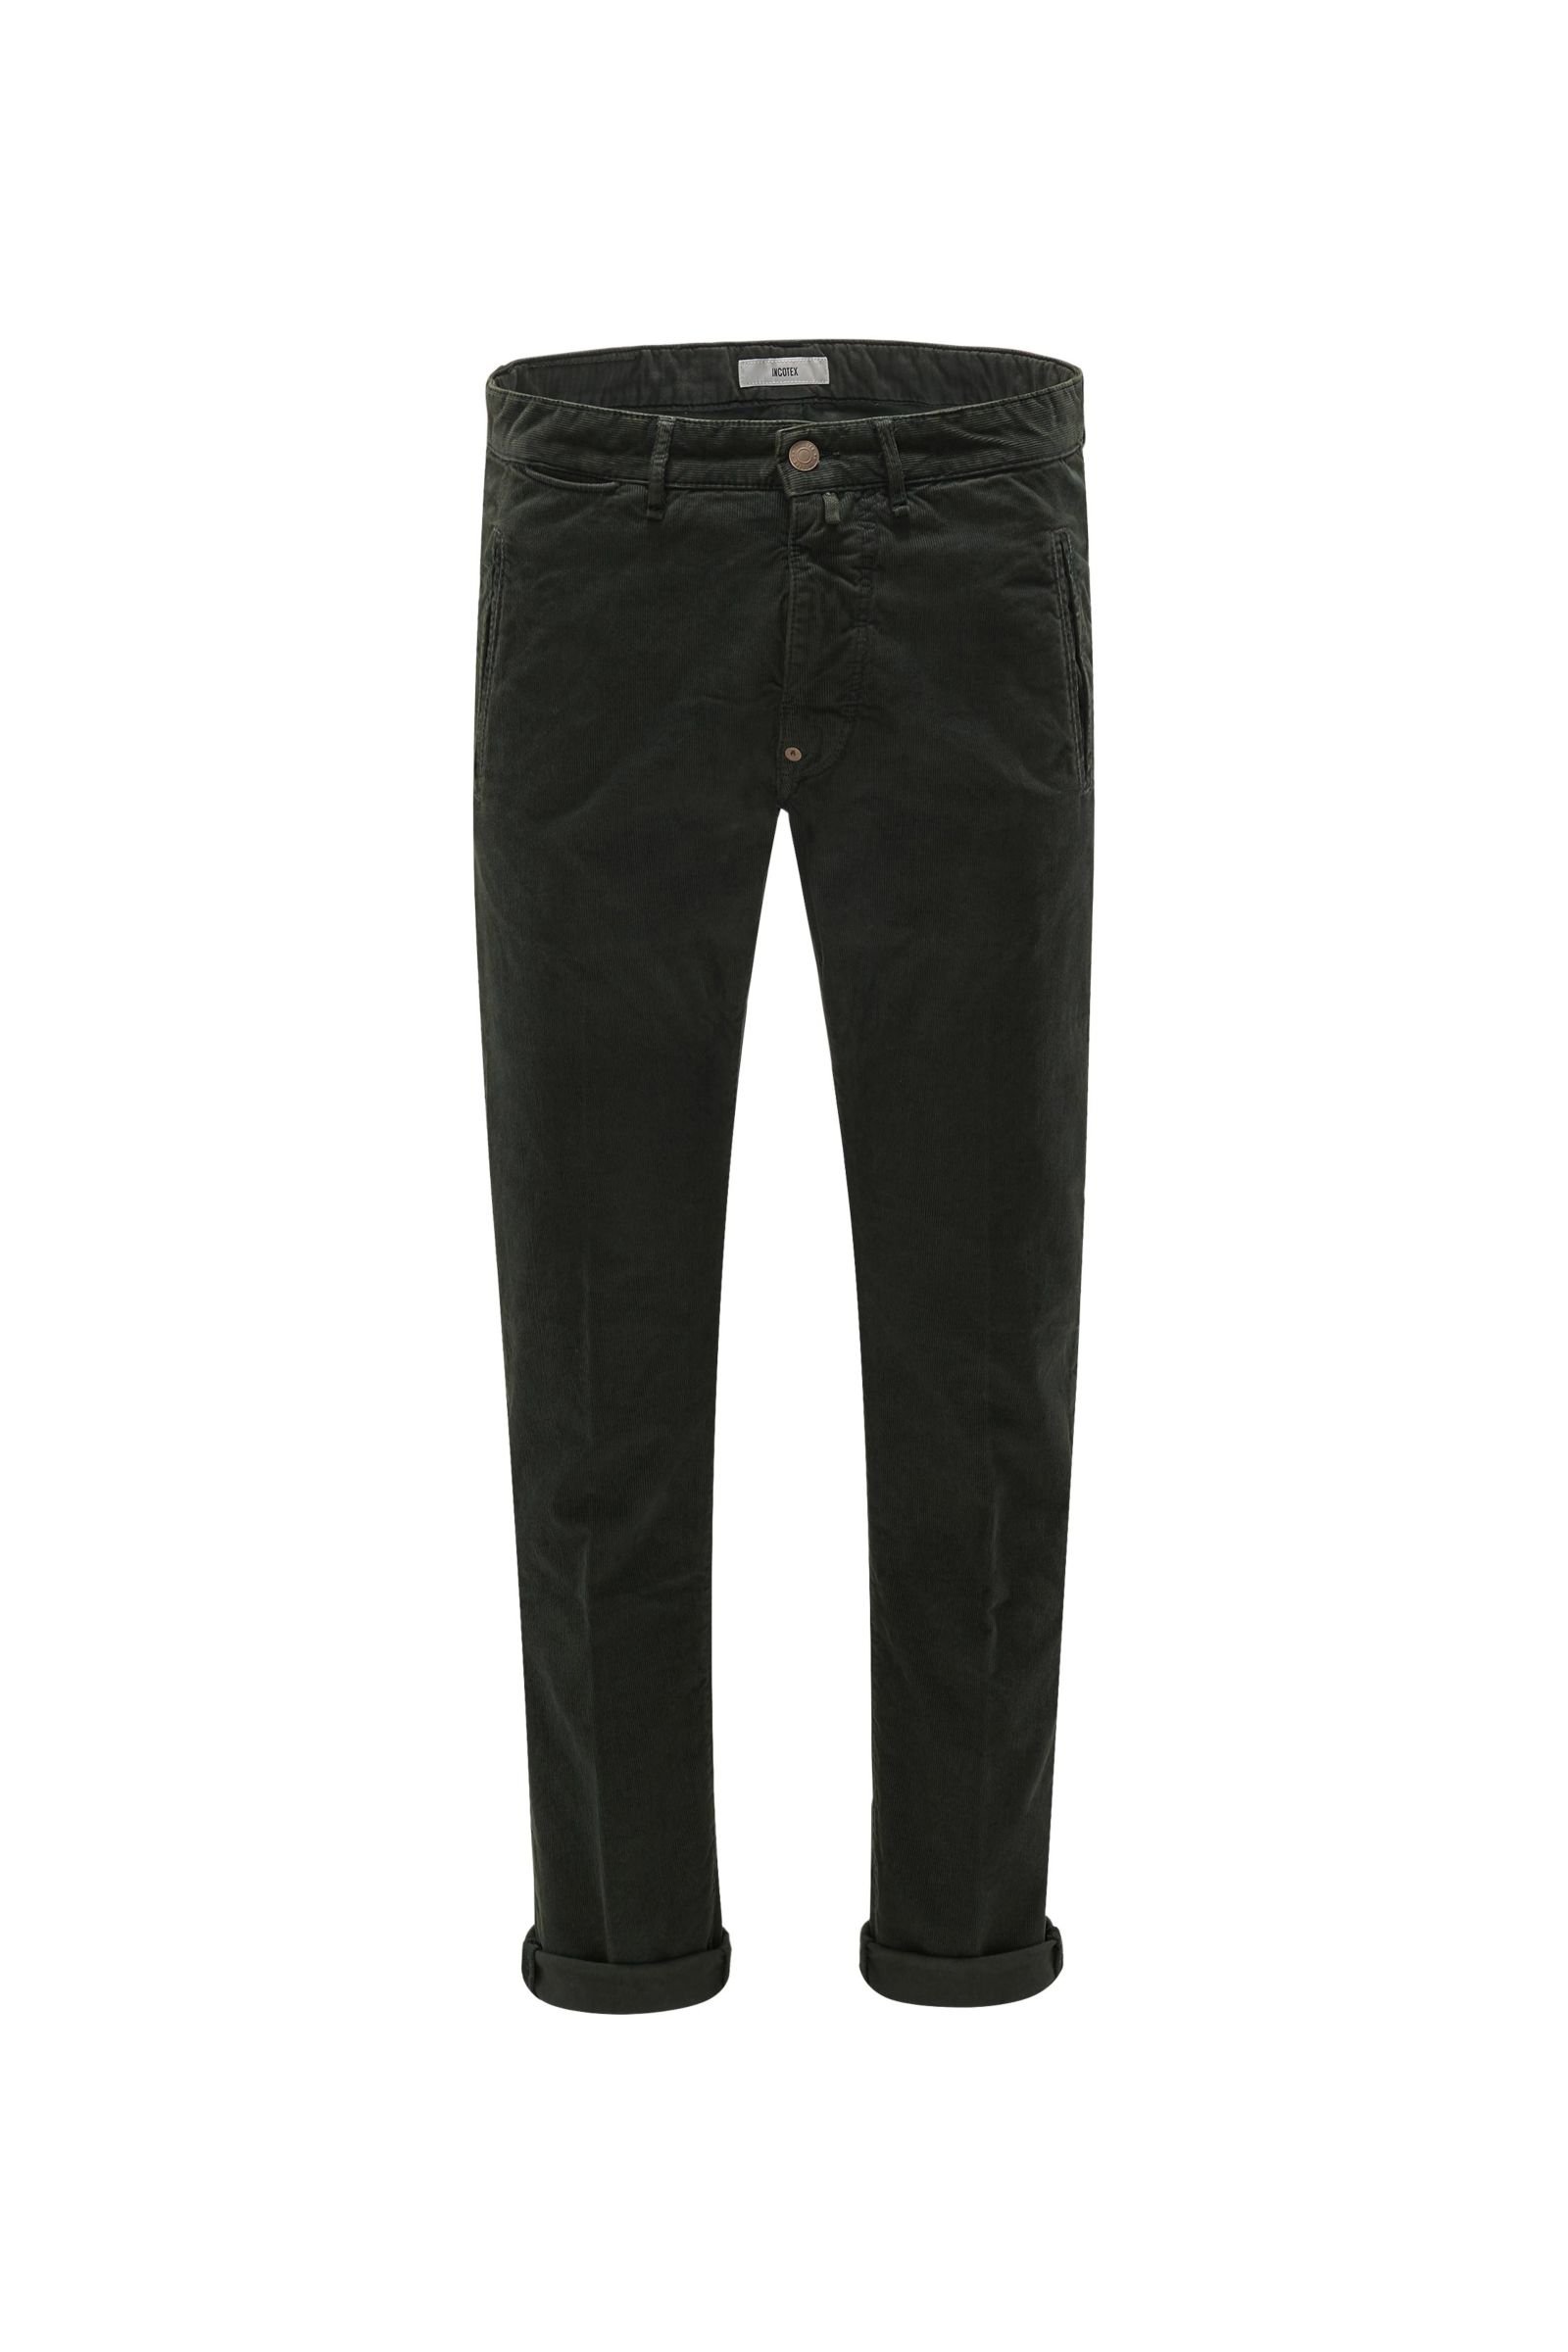 Corduroy trousers 'Taylor Tapered Fit' dark green